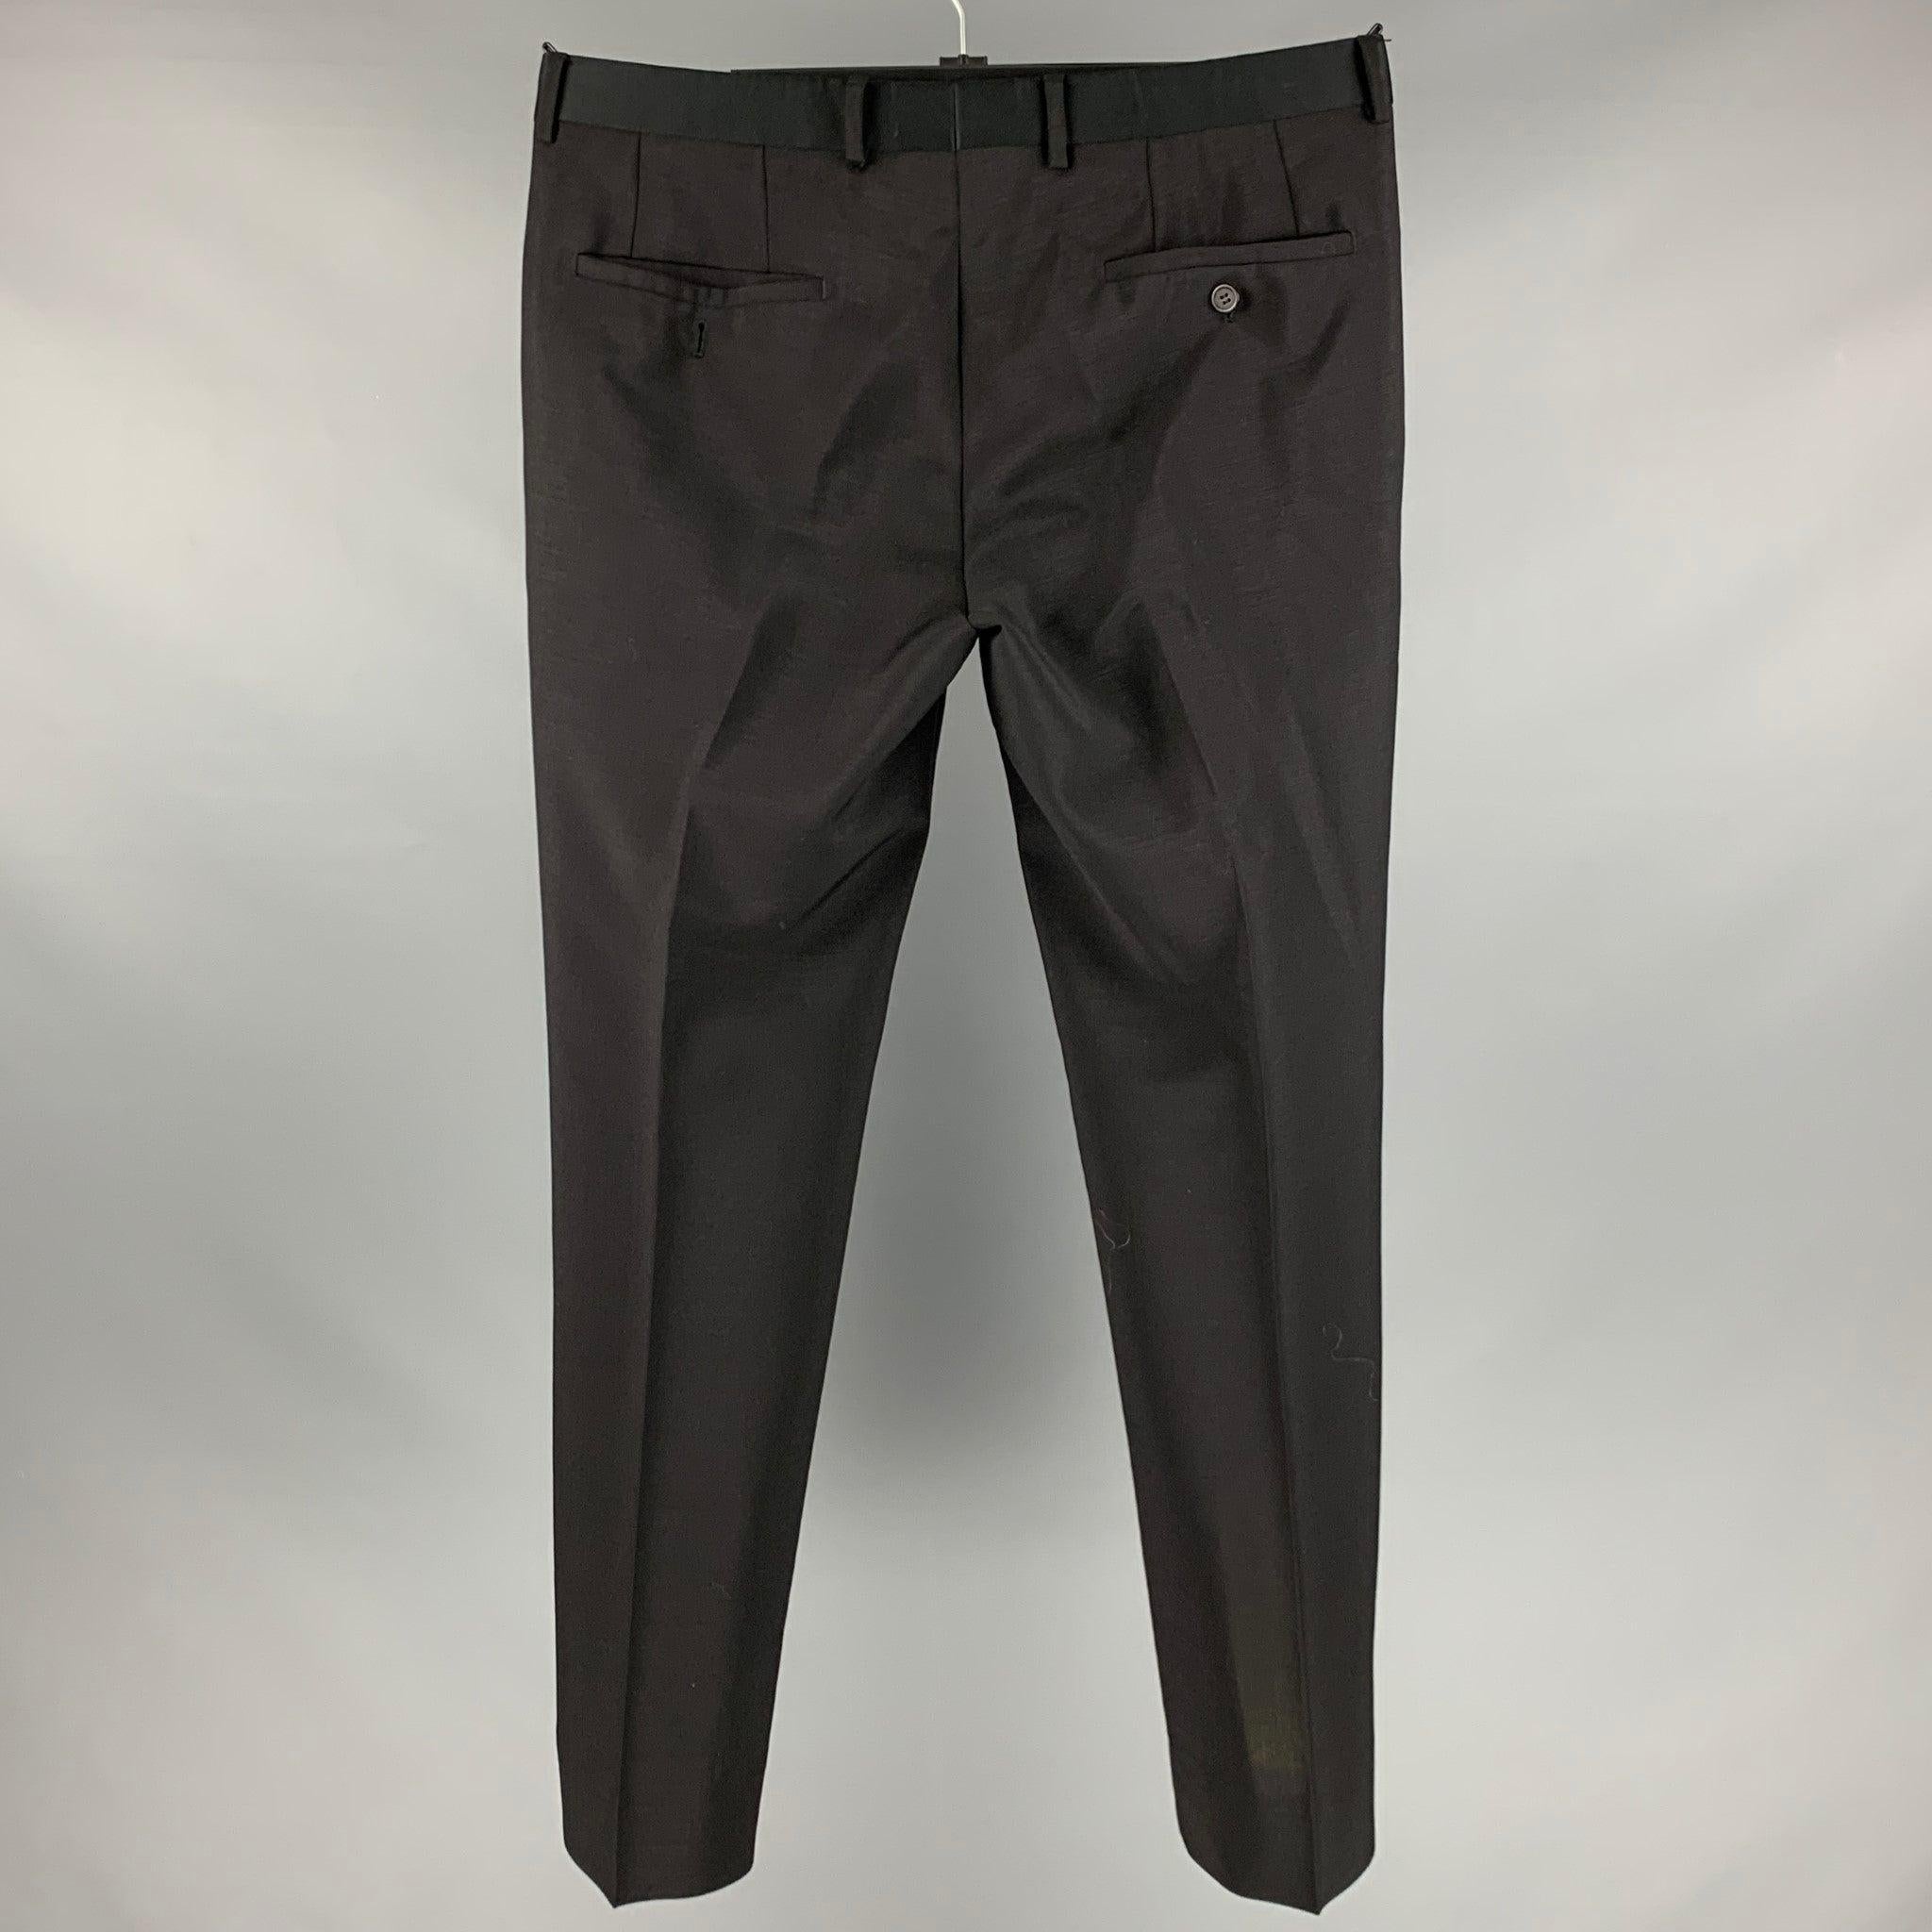 EMPORIO ARMANI tuxedo dress pants in a black mohair wool blend featuring a regular fit, and zipper fly closure. Made in Italy.Very Good Pre-Owned Condition. Minor signs of wear. Missing one button. 

Marked:  50 

Measurements: 
 Waist: 32 inches